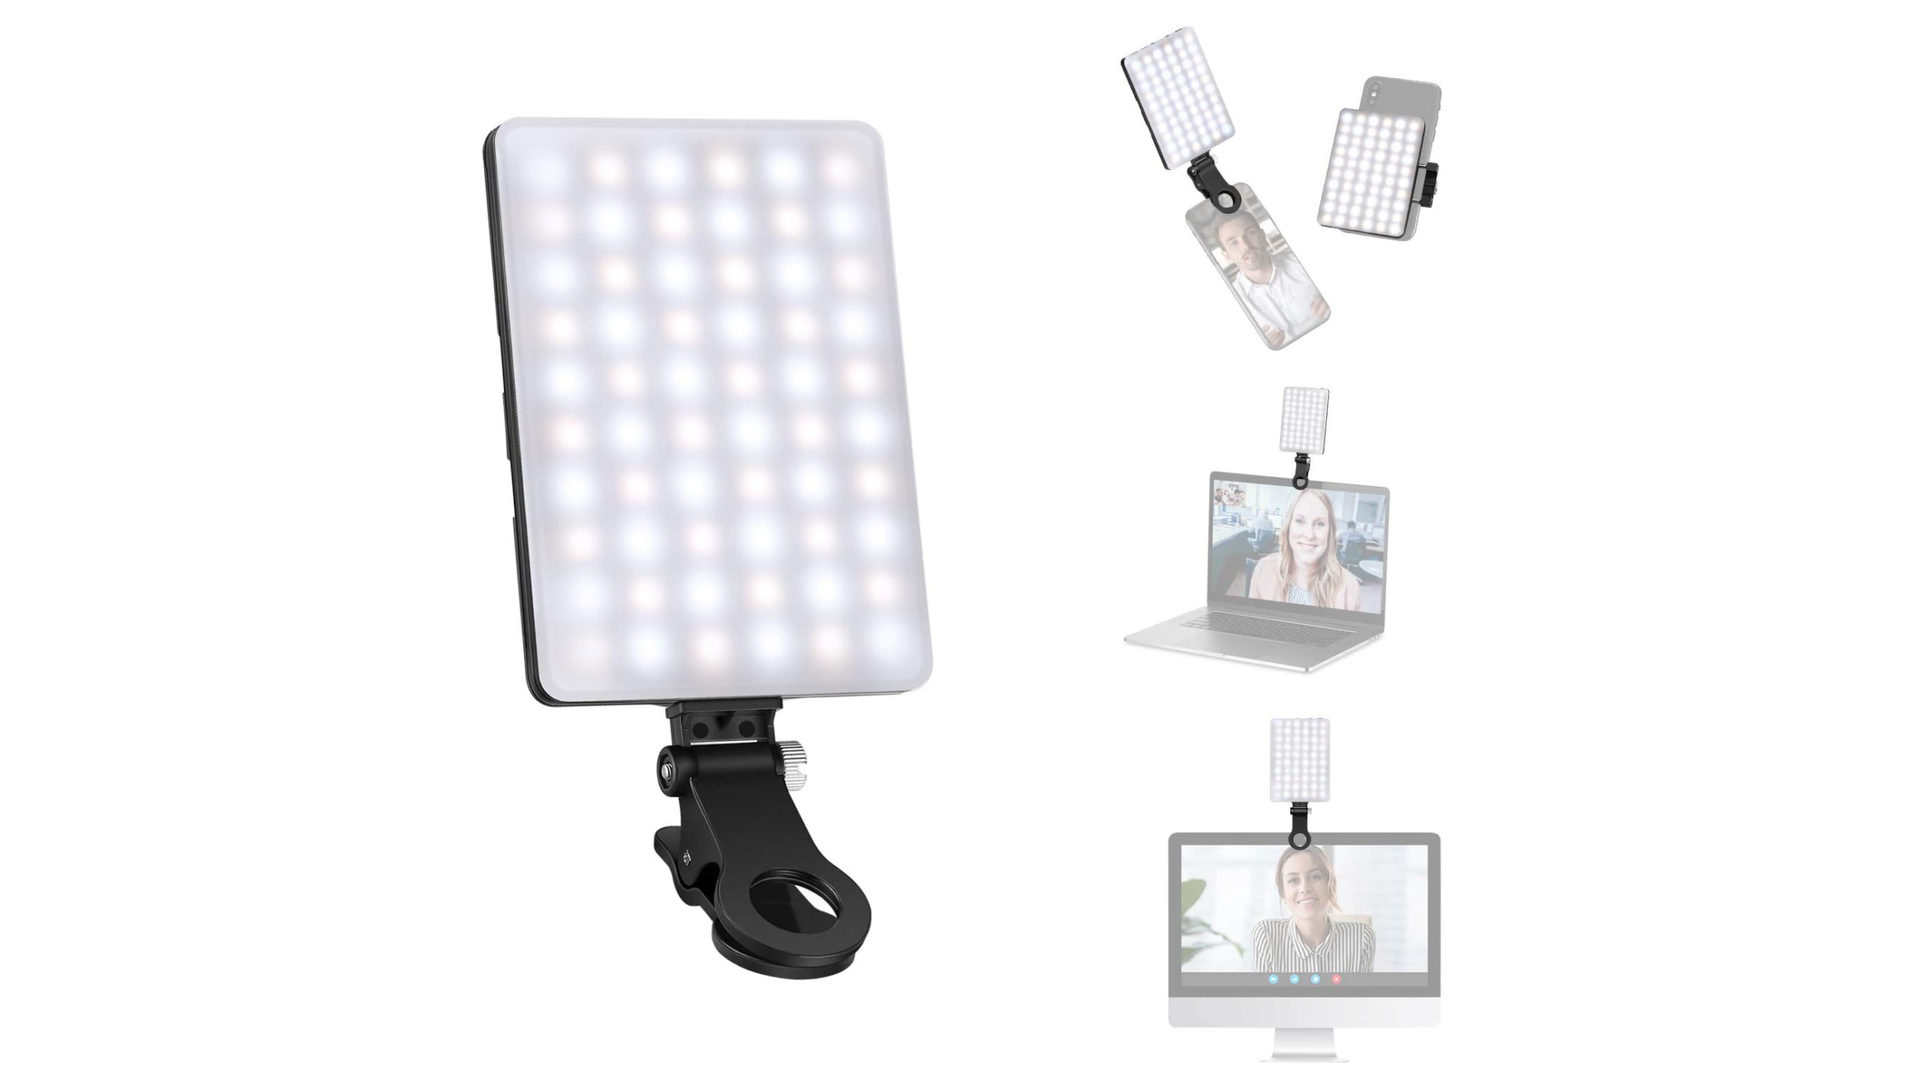 Neewer LED Video Conference Light Kit - The best smartphone photography accessories